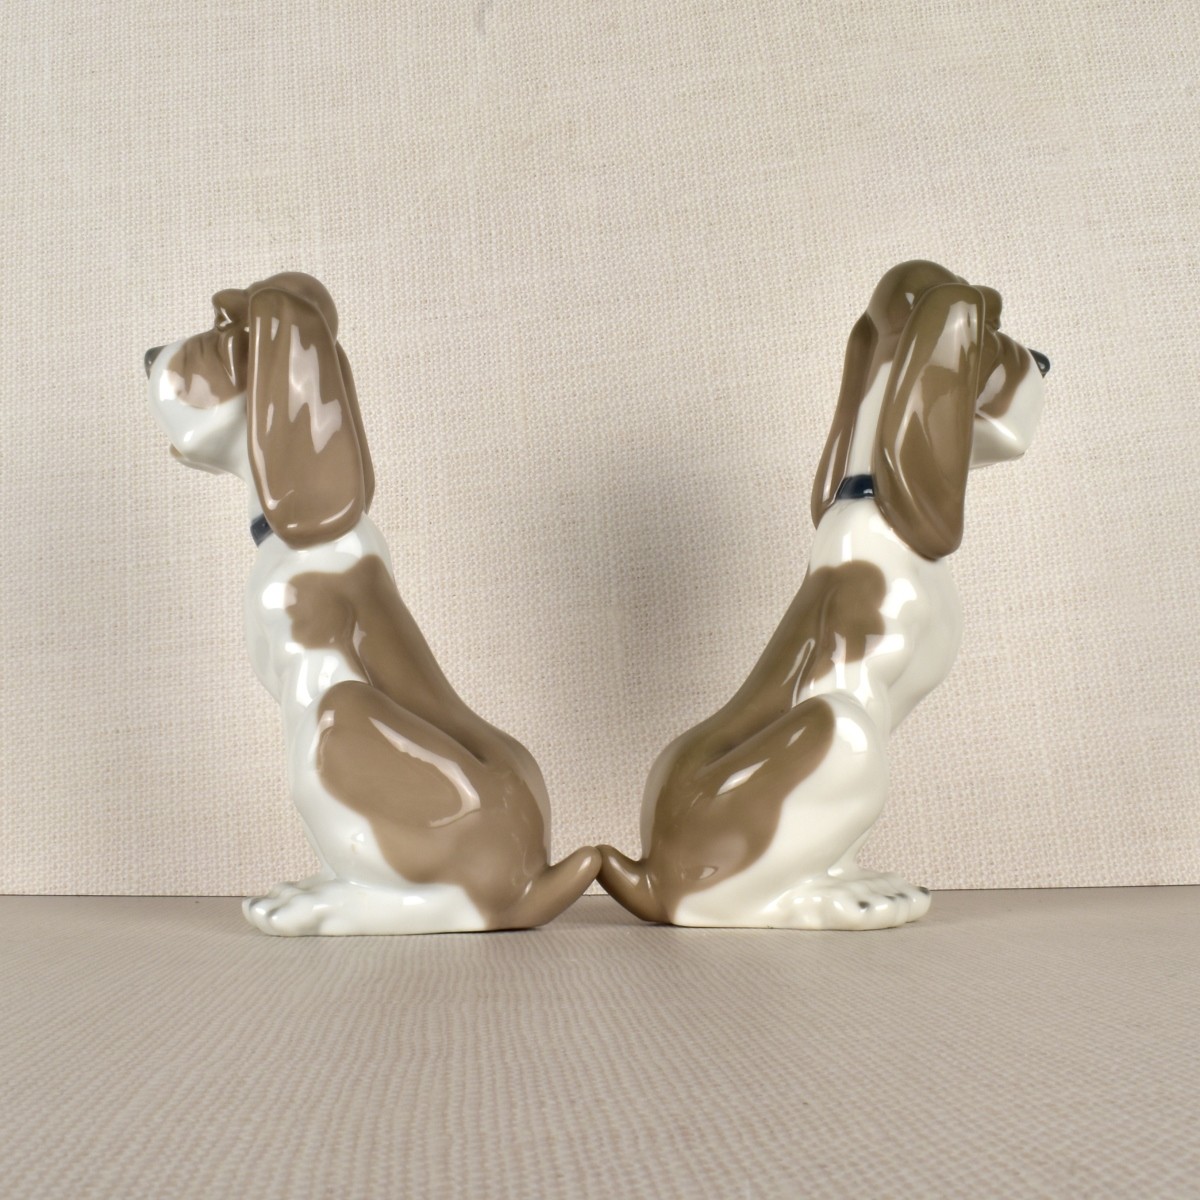 Pr Nao by Lladro Porcelain Hound Dogs